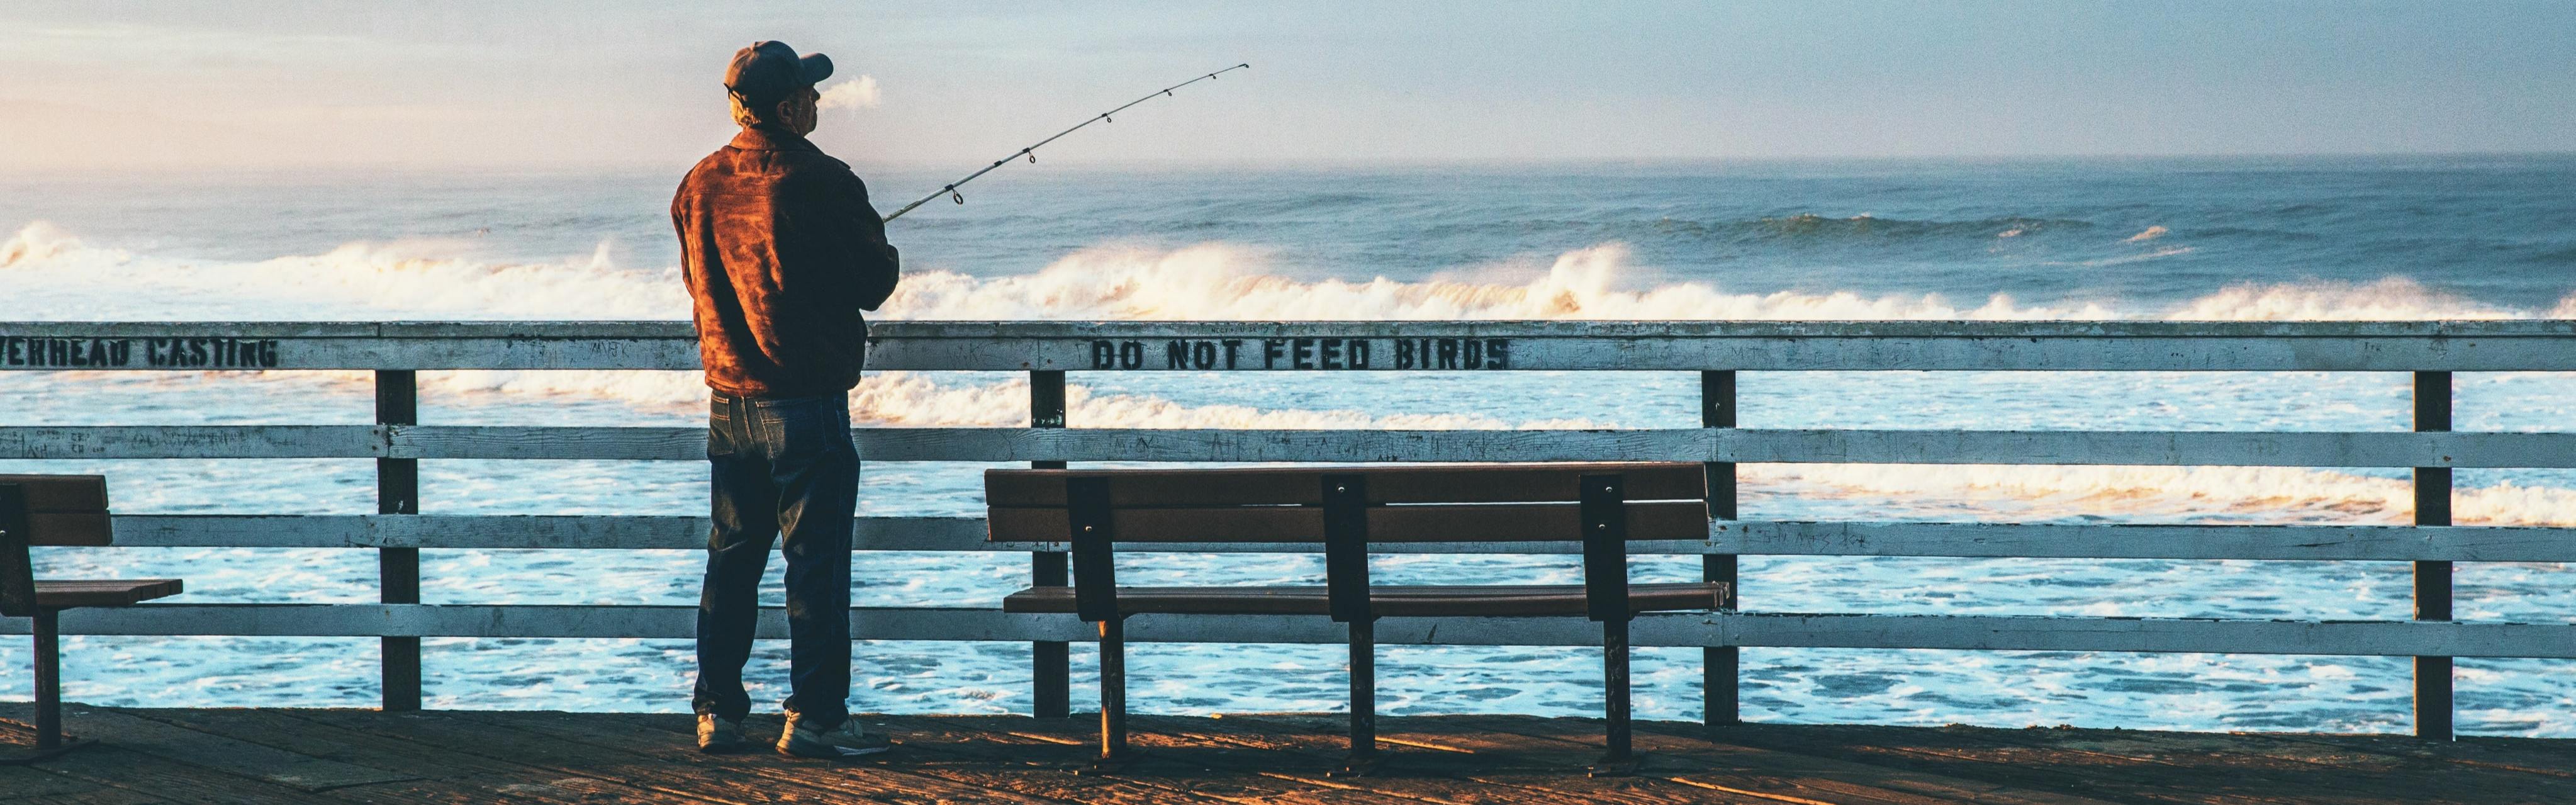 A man fishes off of a pier with waves crashing in the background. Painted in black on the white railing of the pier is "DO NOT FEED BIRDS."